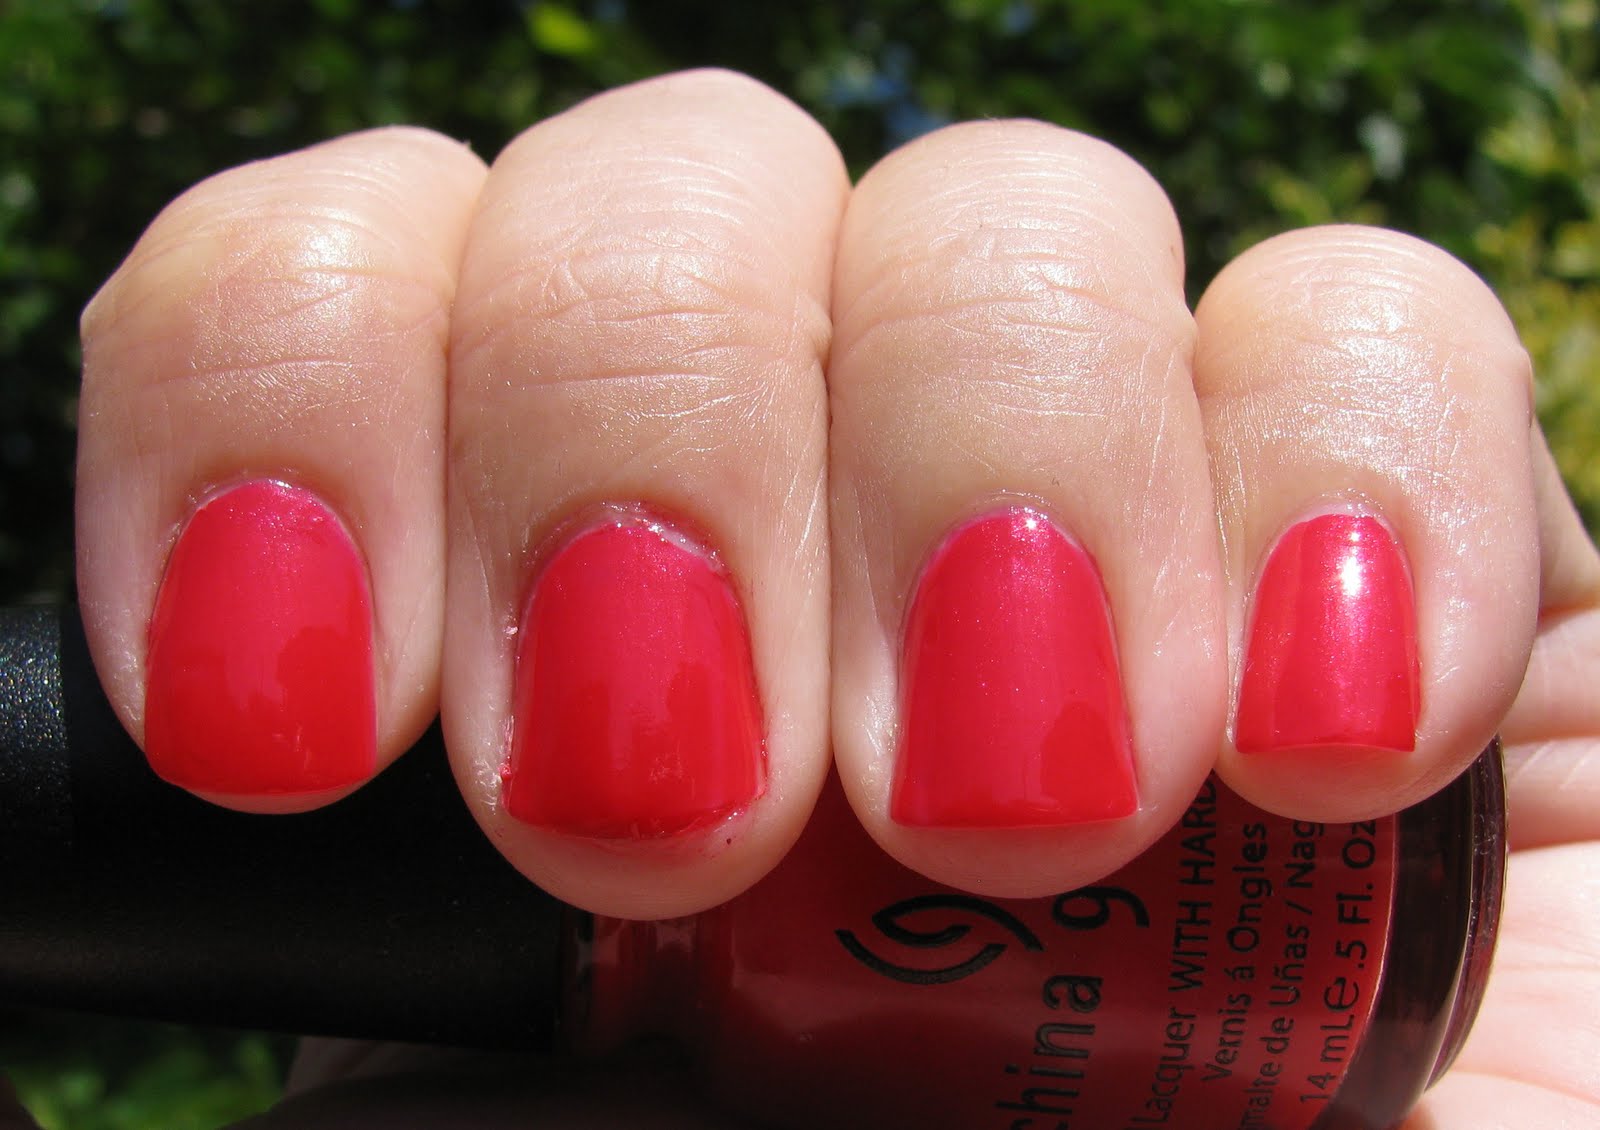 3. China Glaze Nail Lacquer in "Hawaiian Punch" - wide 8